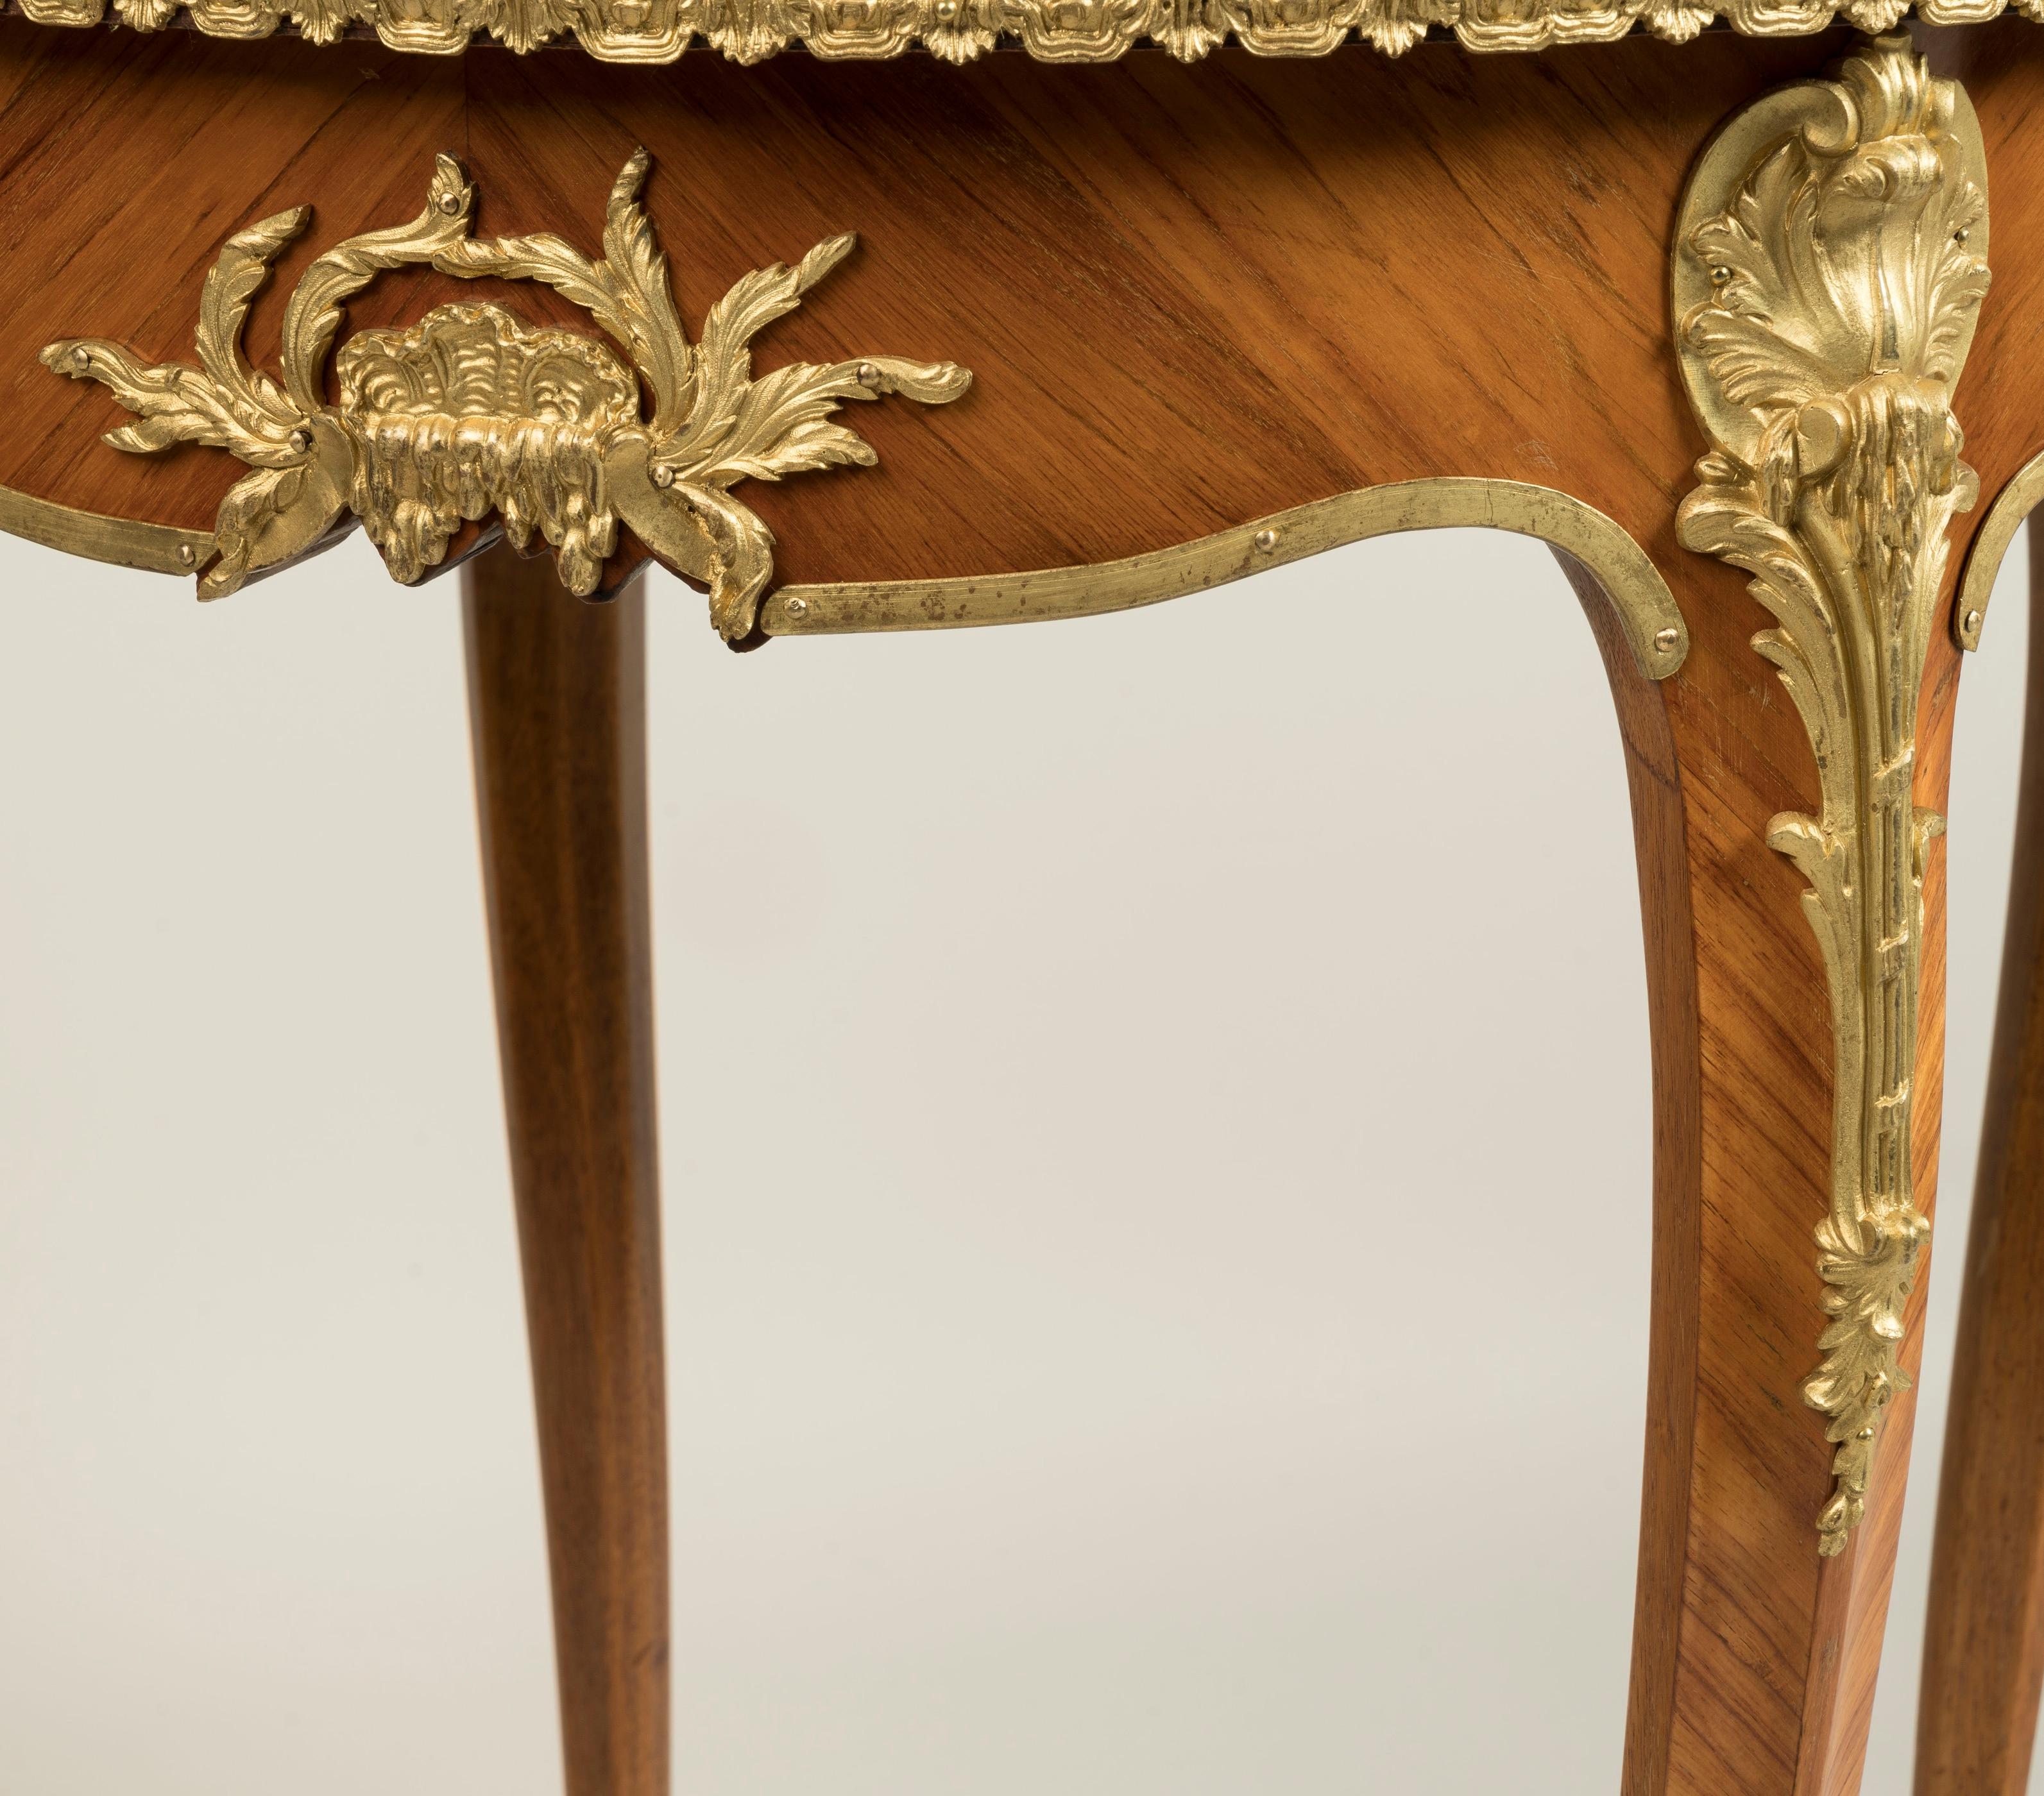 20th Century 19th Century Marquetry Inlaid & Ormolu Table attributed to François Linke For Sale